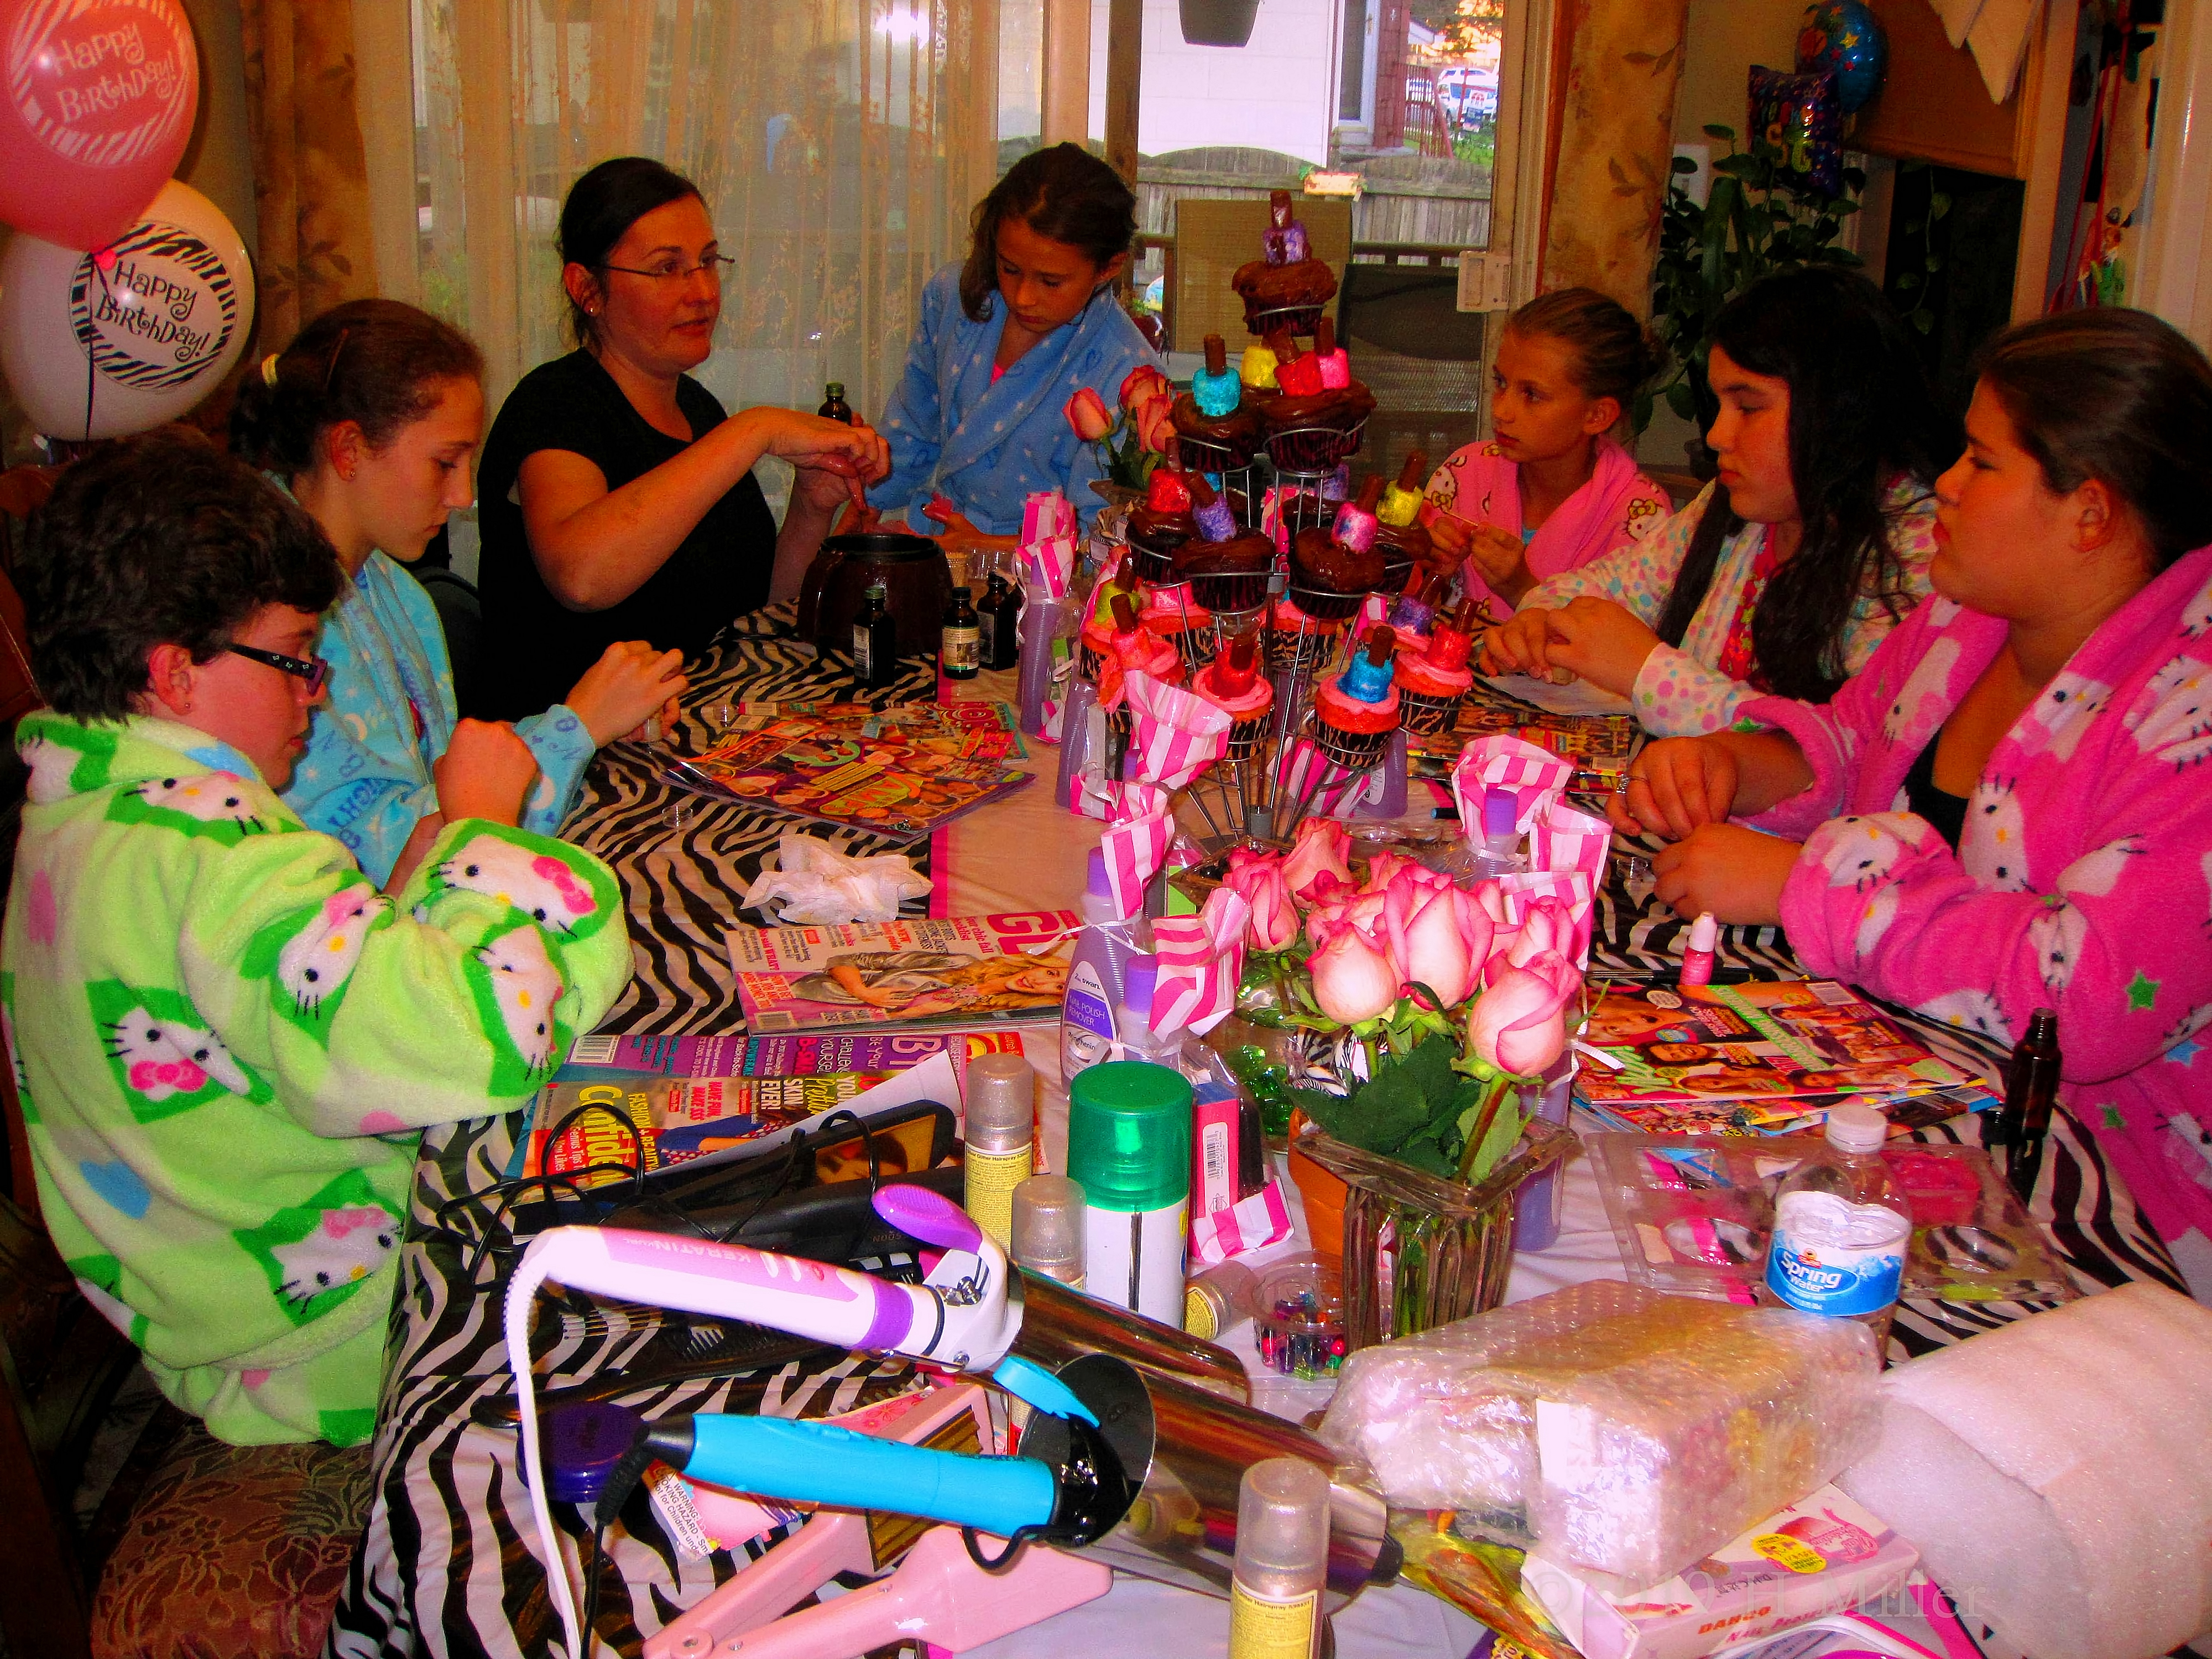 Kids Spa Party For Jillian In New Jersey In October 2014 Gallery 1 